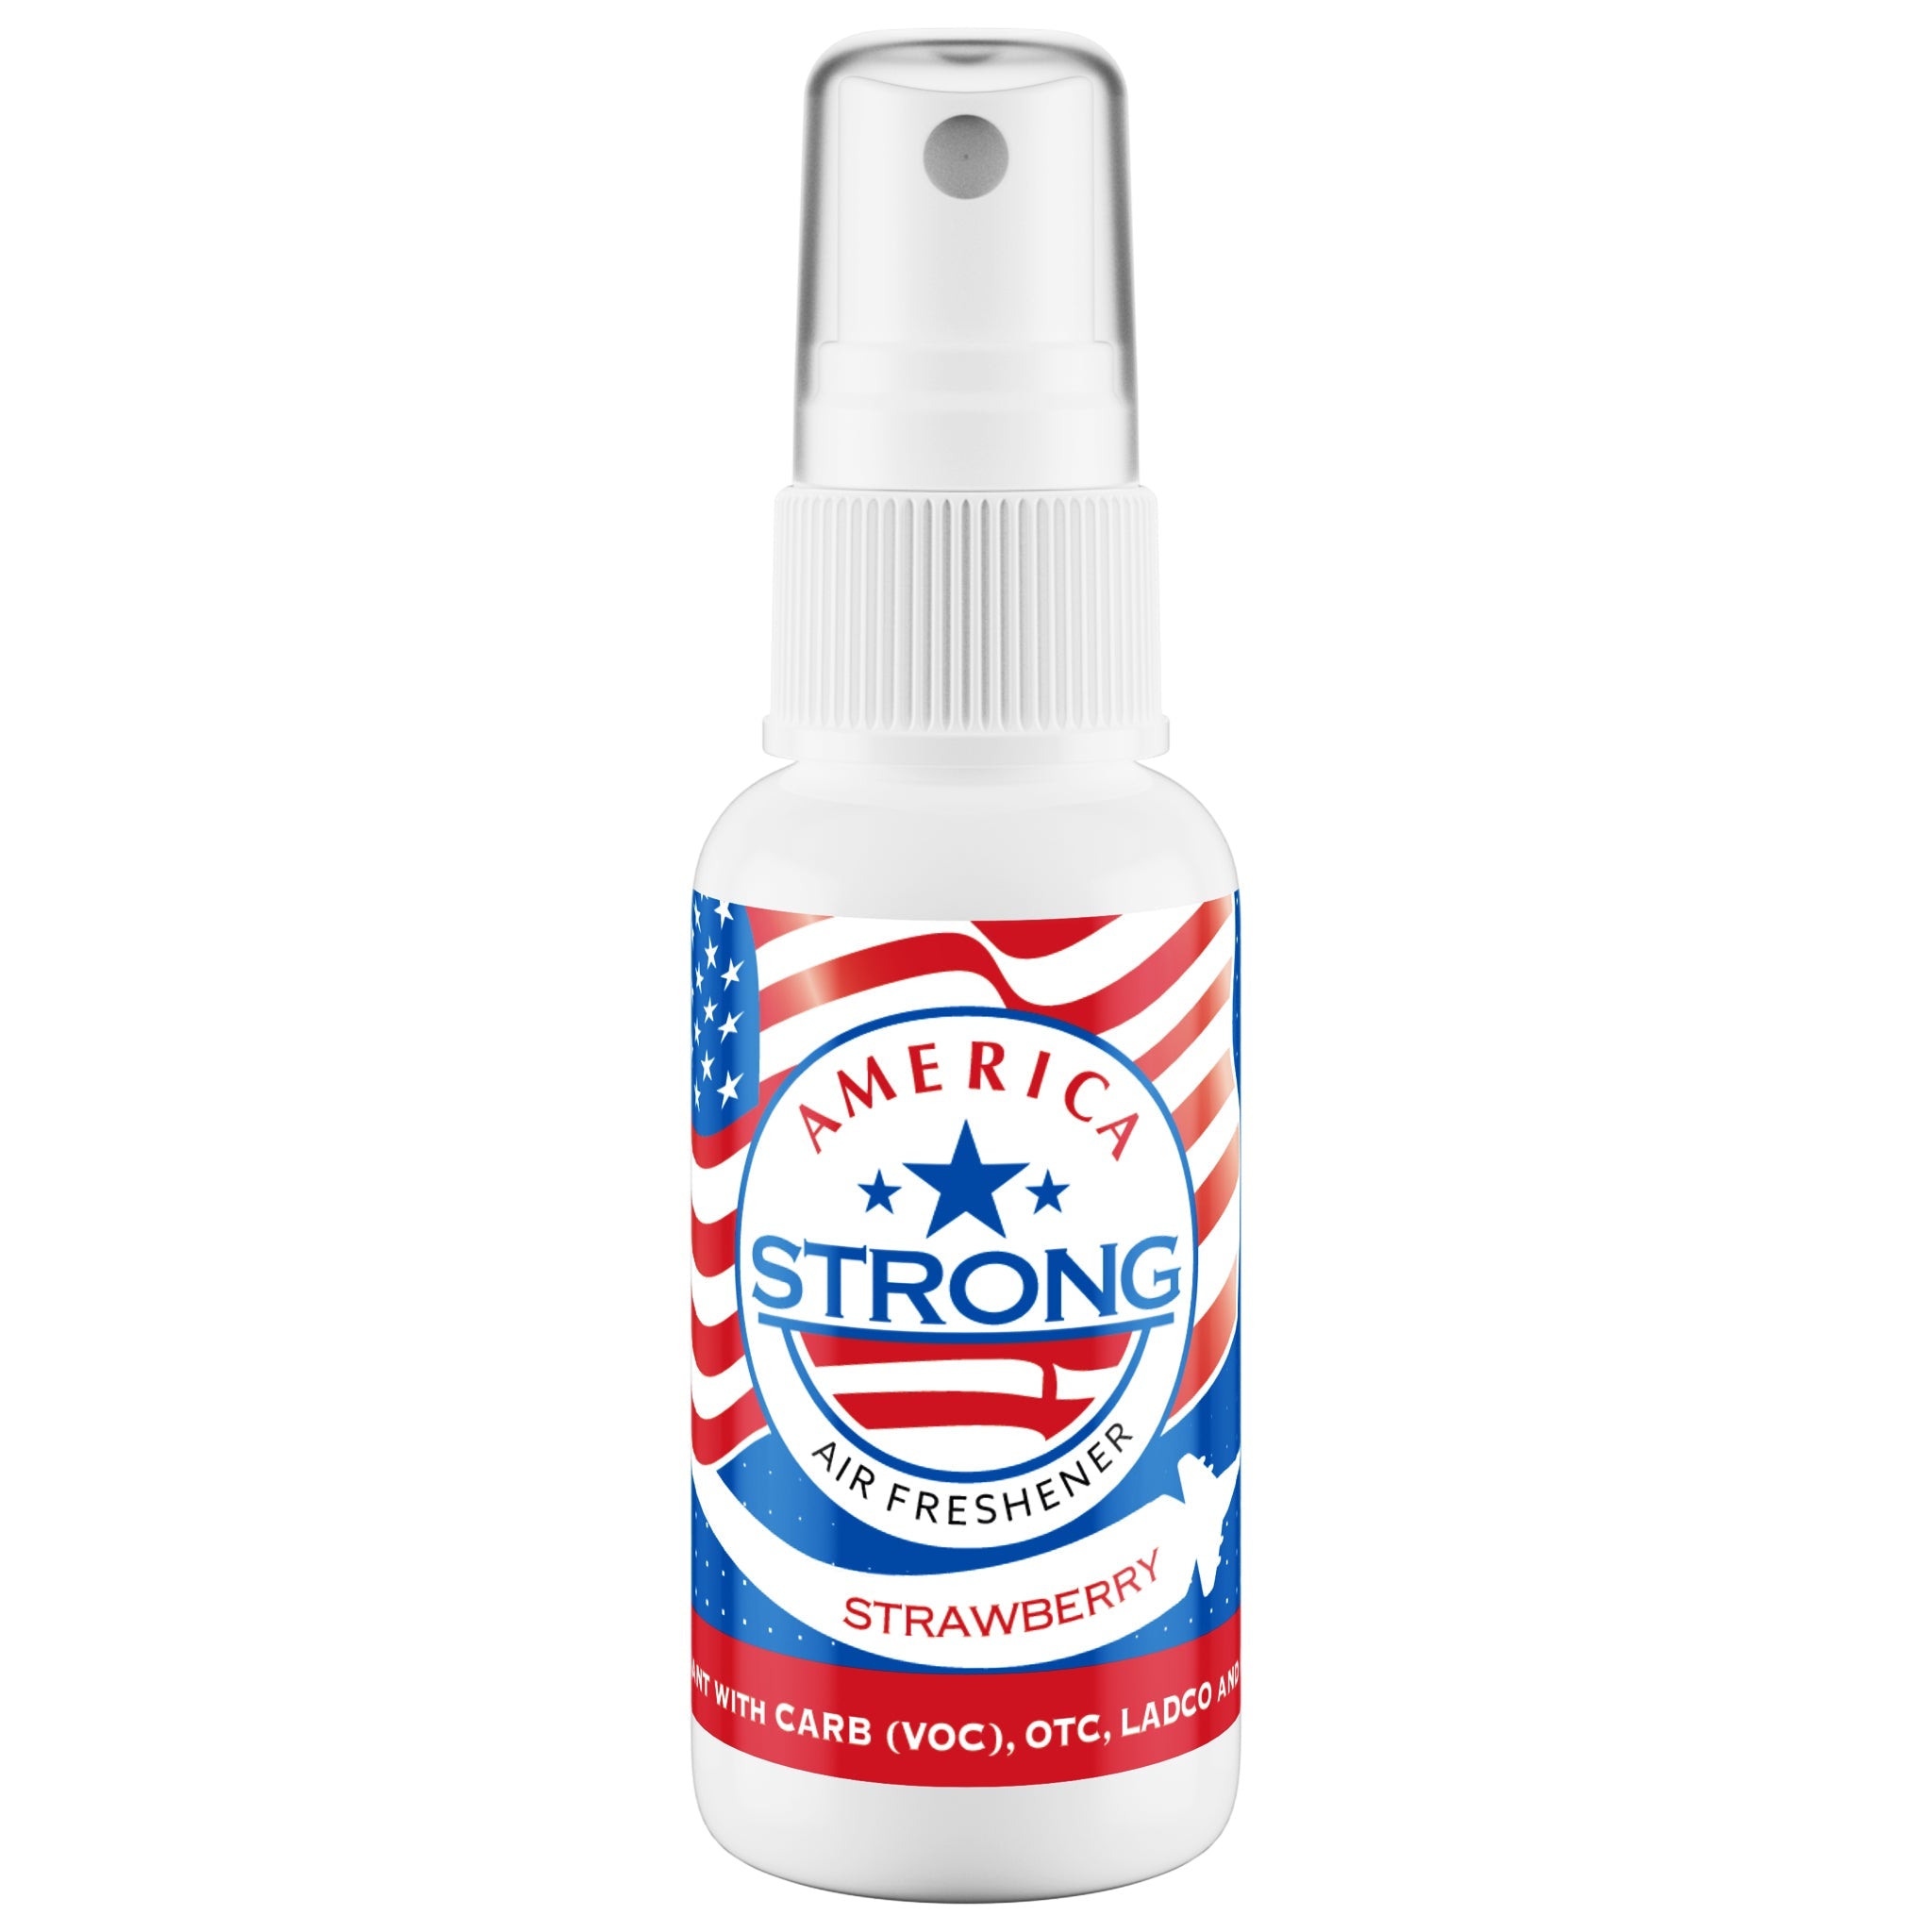 America Strong Air Freshener - Strawberry Scent